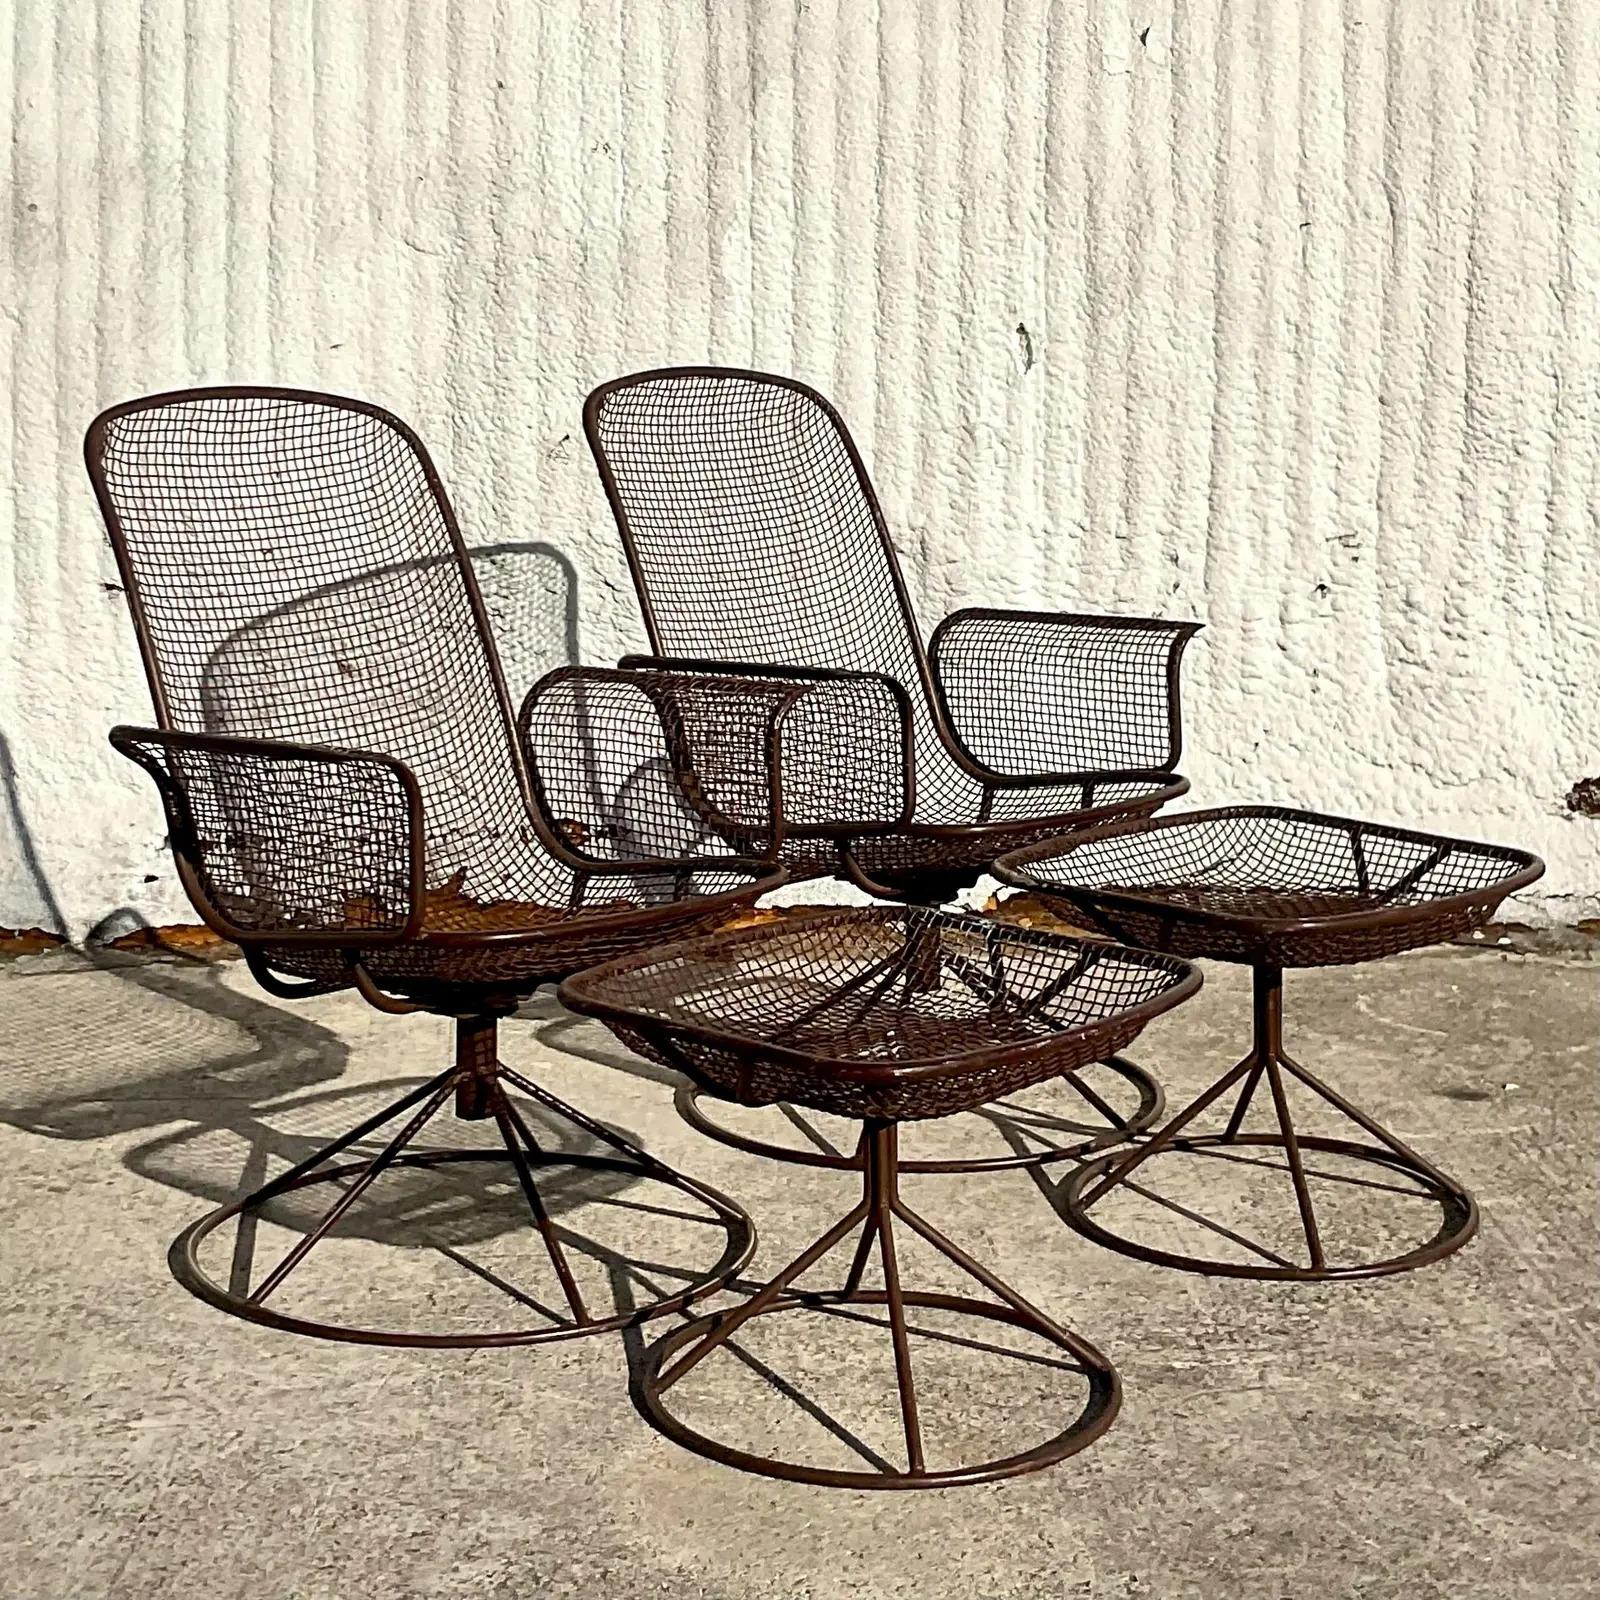 North American Vintage MCM Wire Mesh Swivel Chairs and Ottomans After Woodard - Set of 4 For Sale